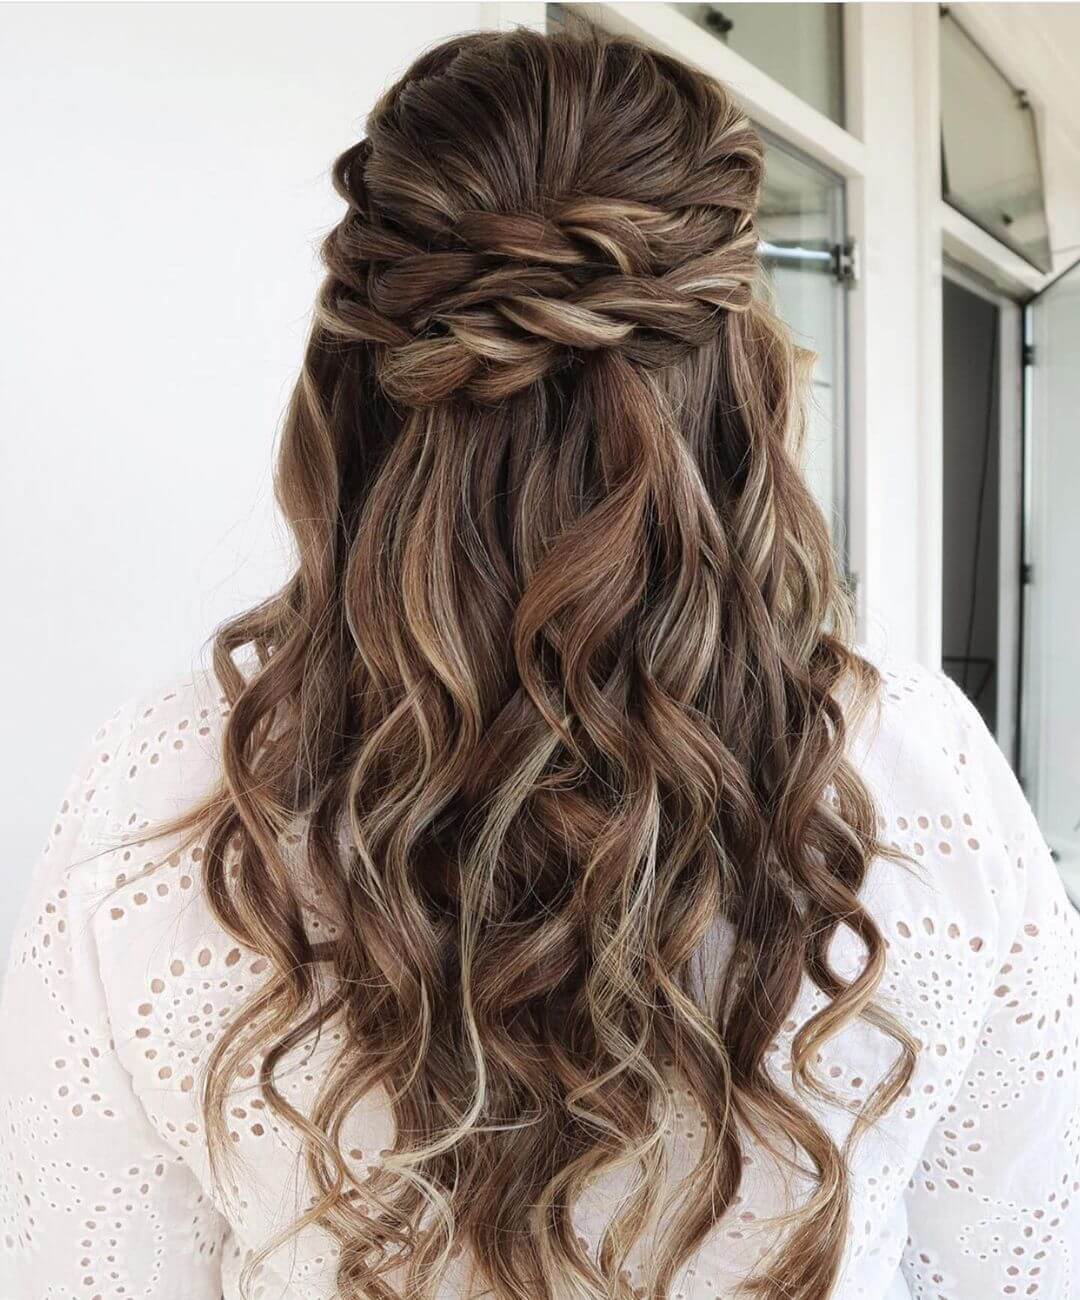 easy-open-hairstyles-for-long-hair-2 - K4 Fashion